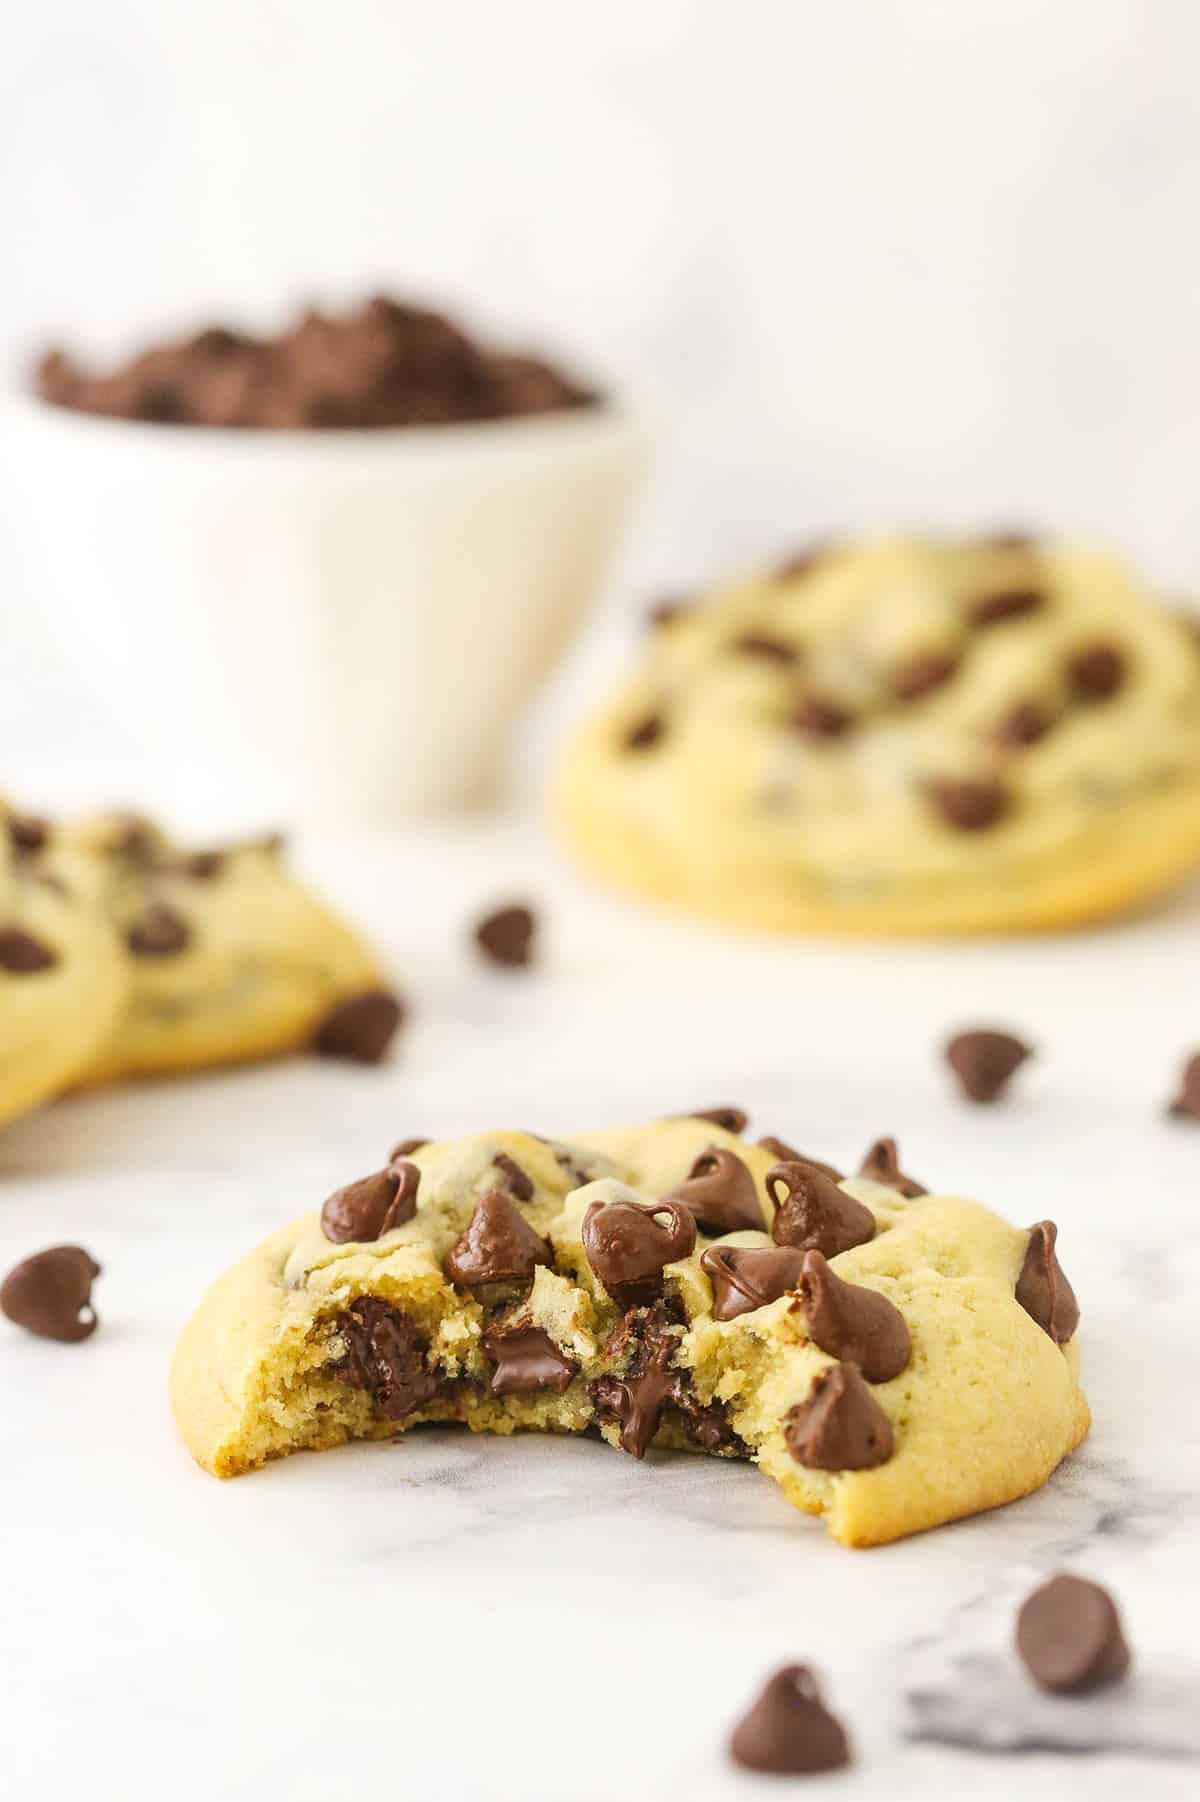 A soft and chewy chocolate chip cookie on a marble kitchen countertop with a big bite taken out of it to reveal a bunch of melty chocolate chips in the center.